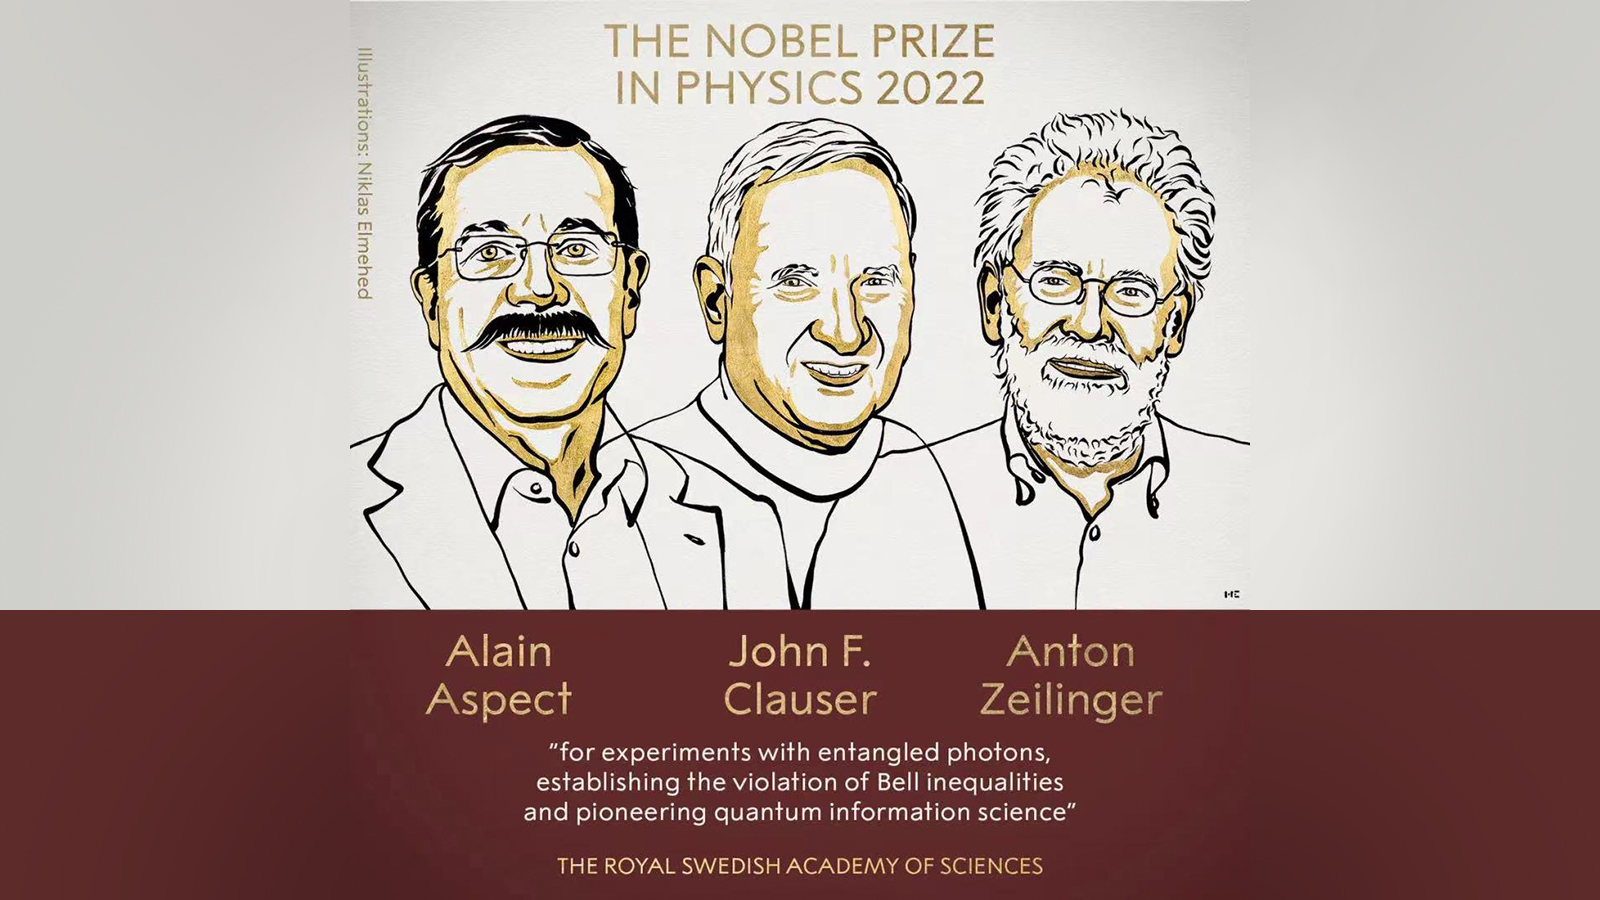 The laureates of the 2022 Nobel Prize in Physics are bestowed jointly to Alain Aspect, John F. Clauser and Anton Zeilinger. /Nobel Prize official website